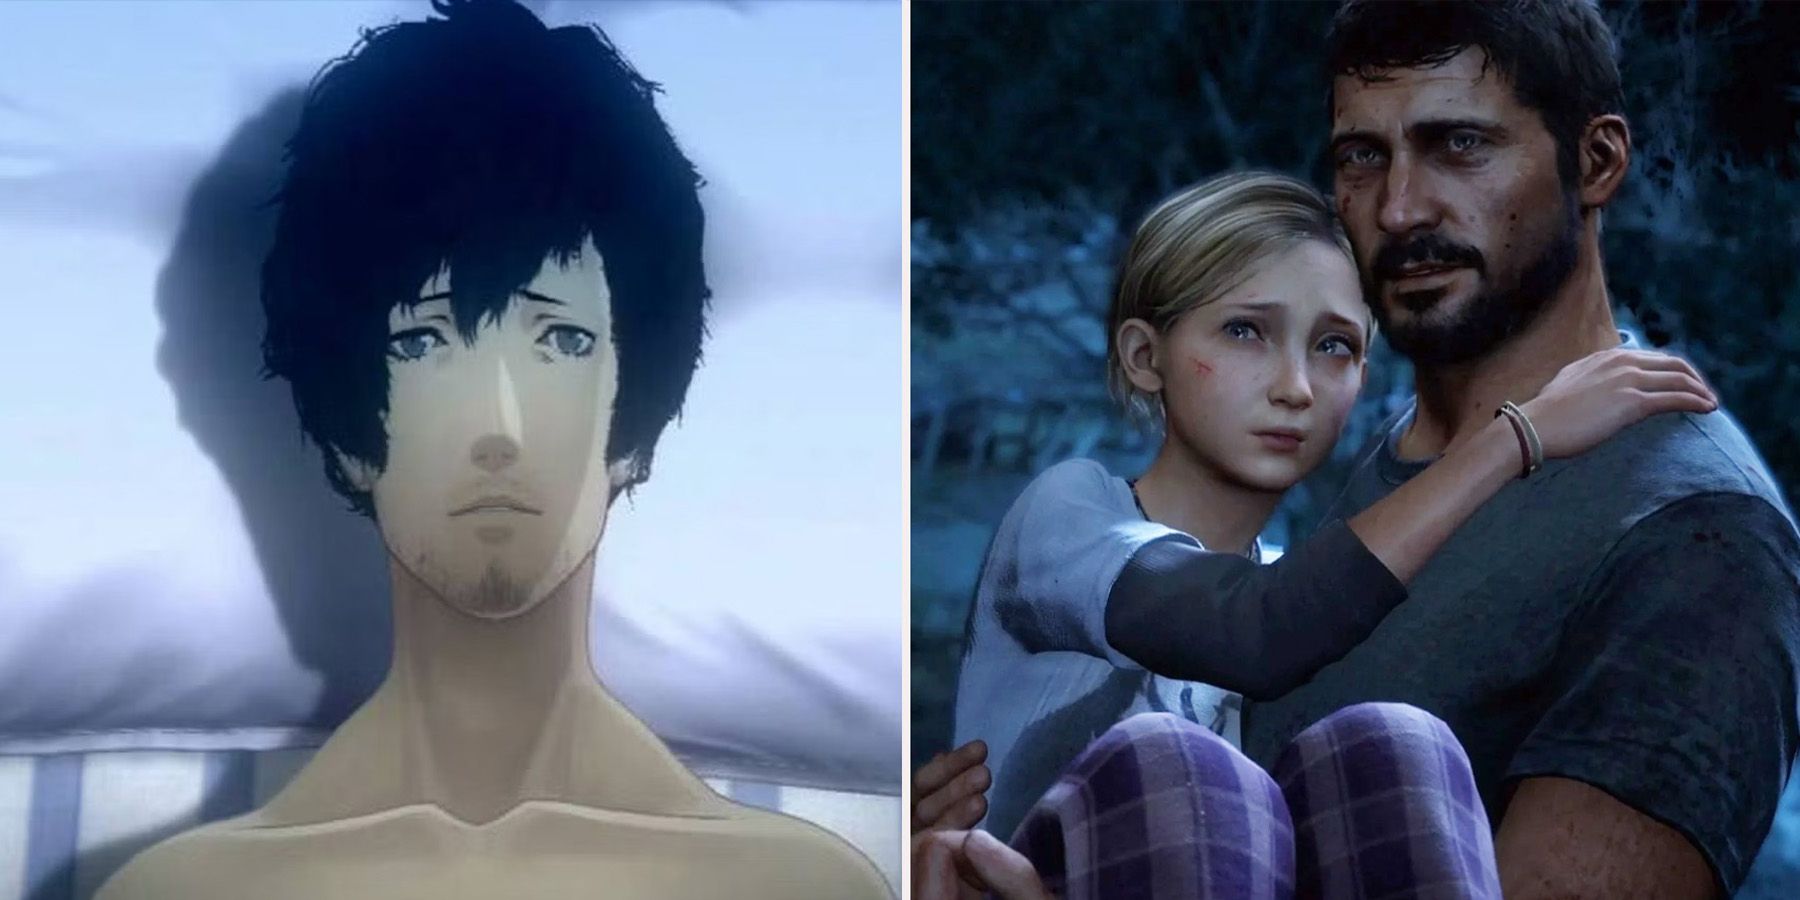 joel last of us and catherine vincent